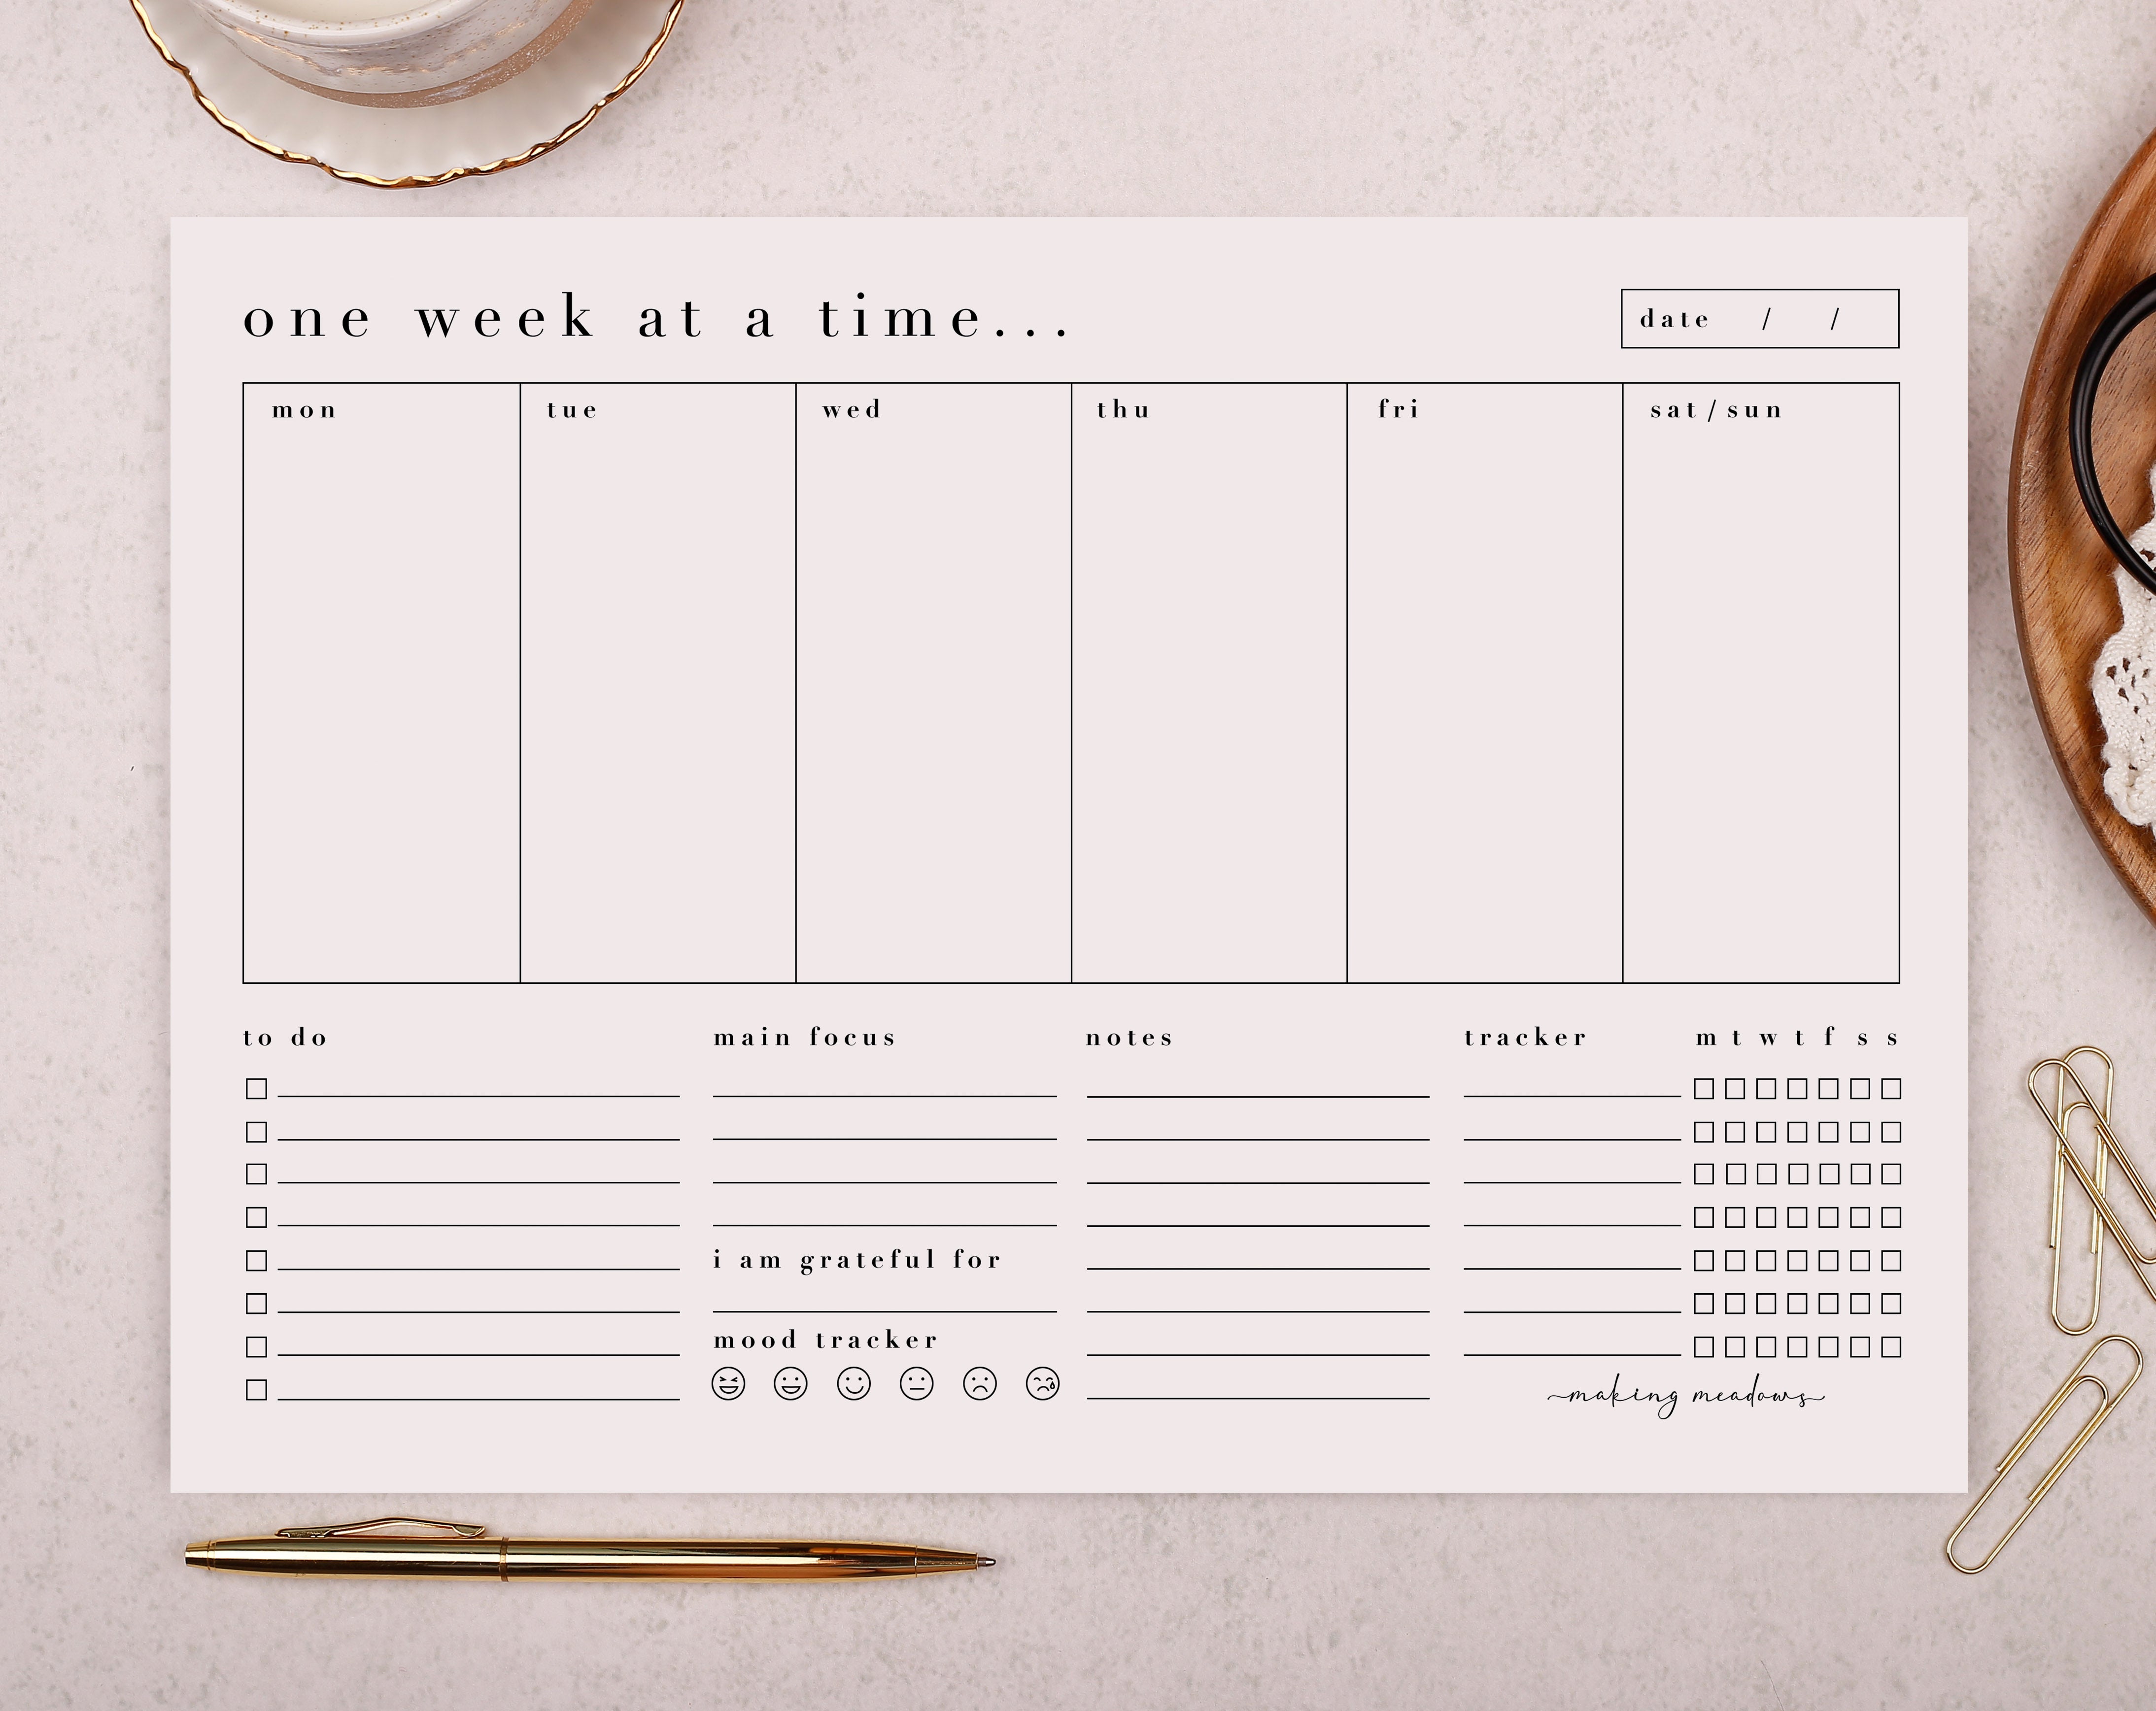 A simple 'one week at a time' habit tracker and tear off weekly planner desk pad